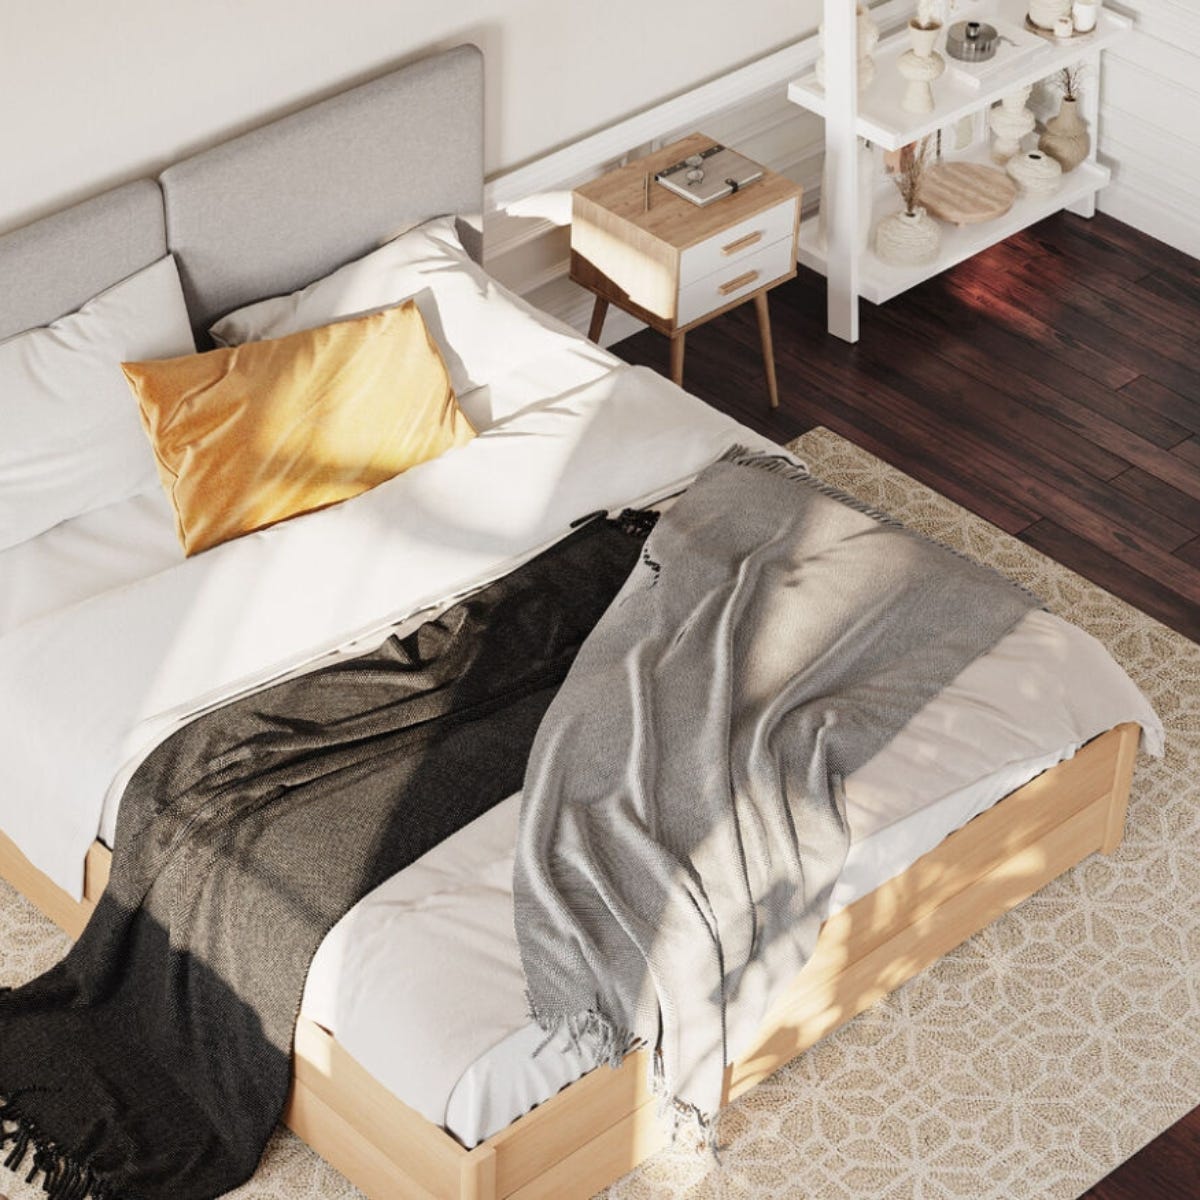 Classic_Wooden_Bed_Influencer_Mood_6